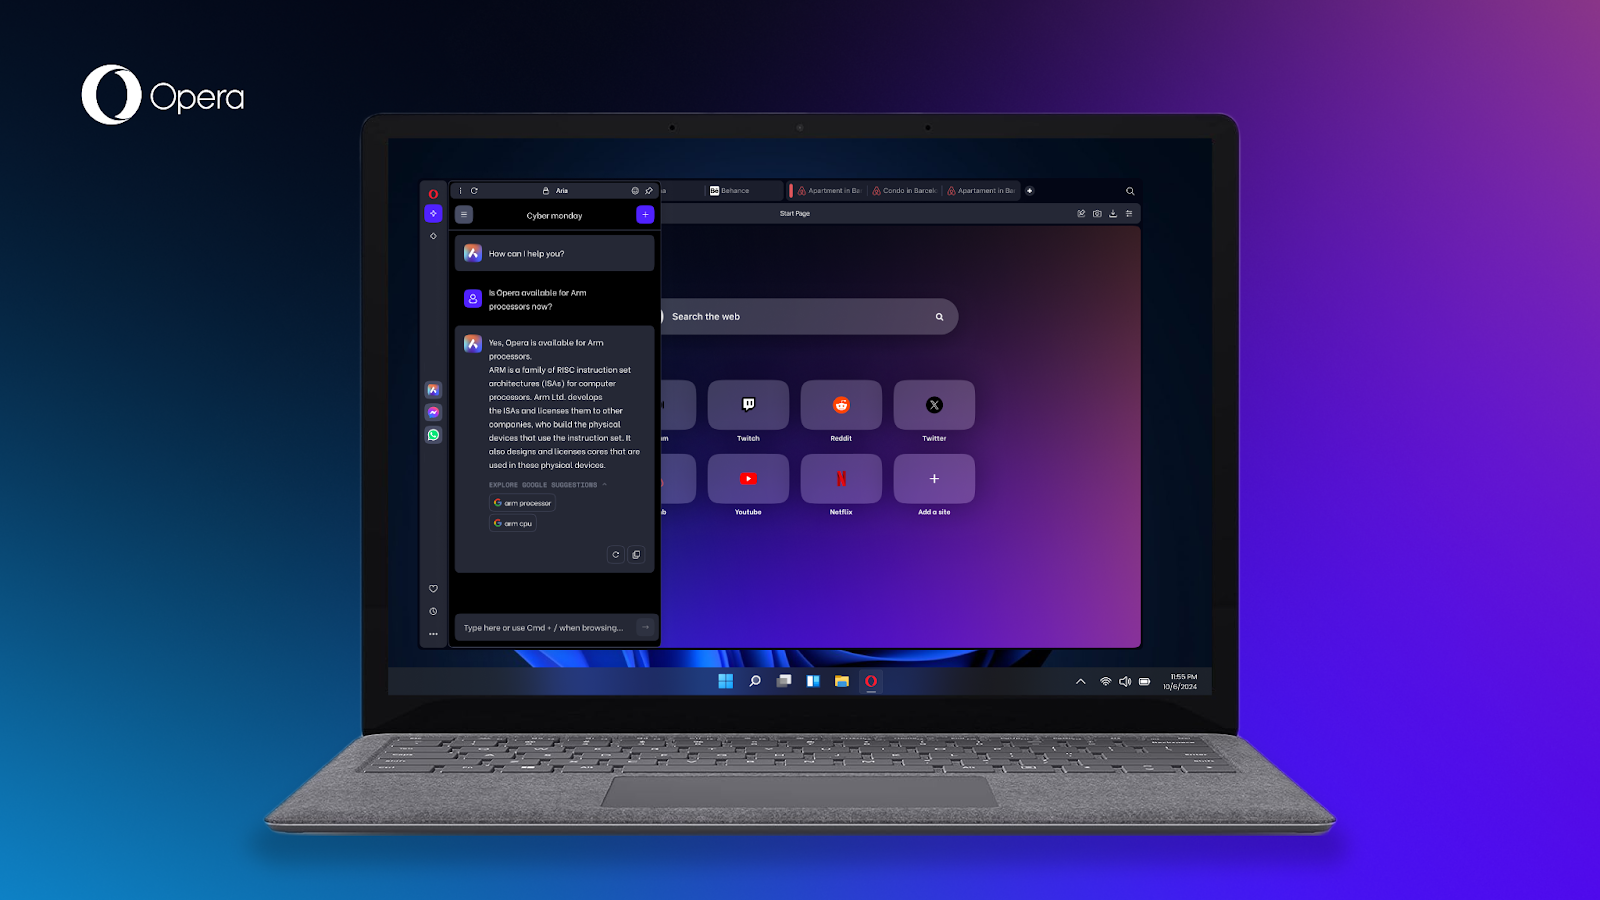 Opera goes native for Windows on Arm